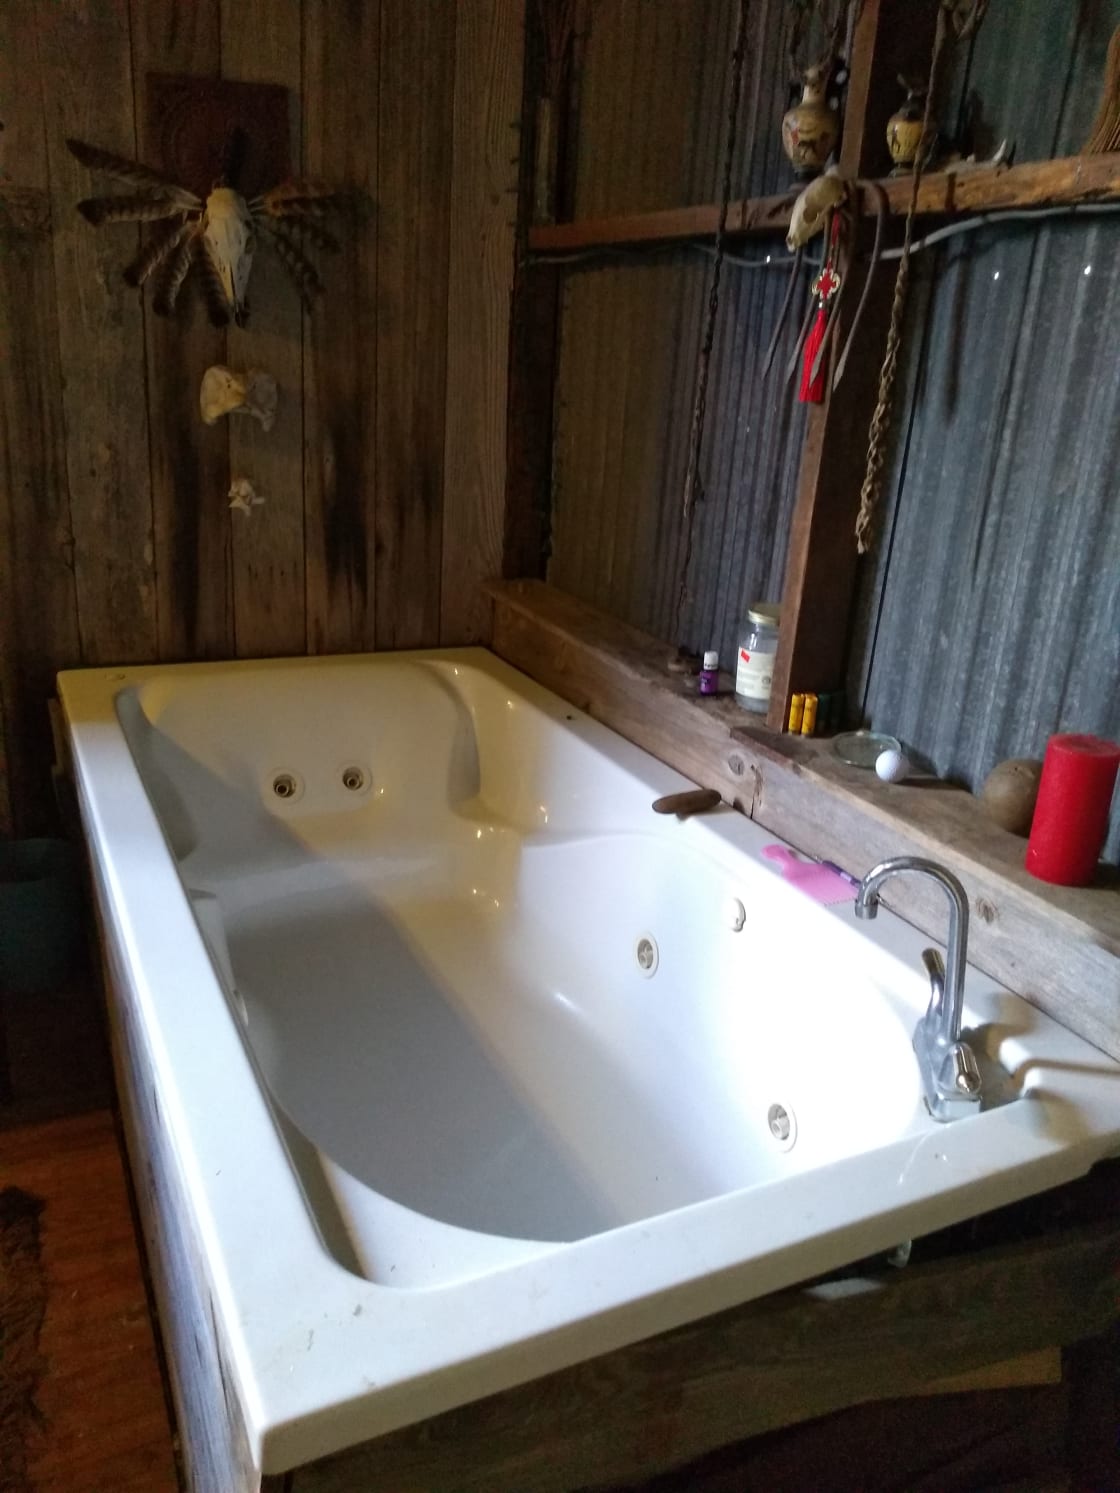 Jacuzzi bath in the shed.